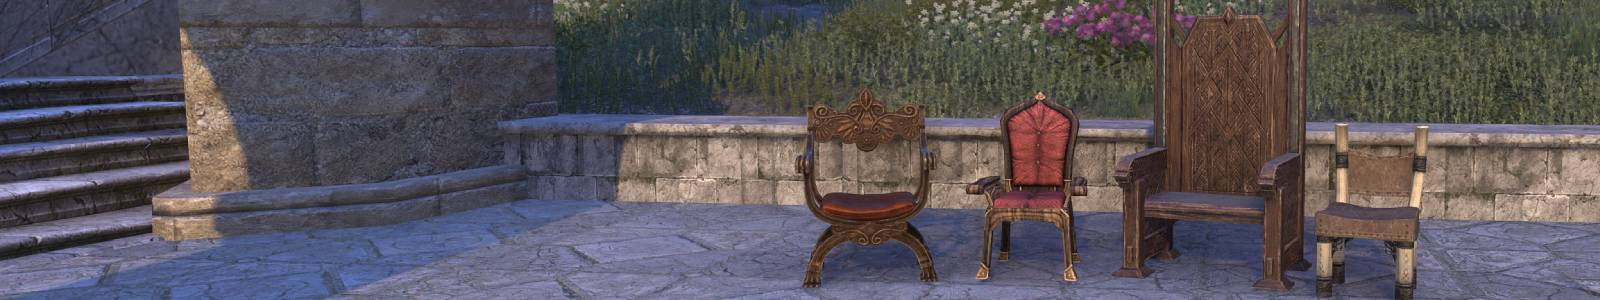 Dawnwood Seat, Sprouted - ESO header